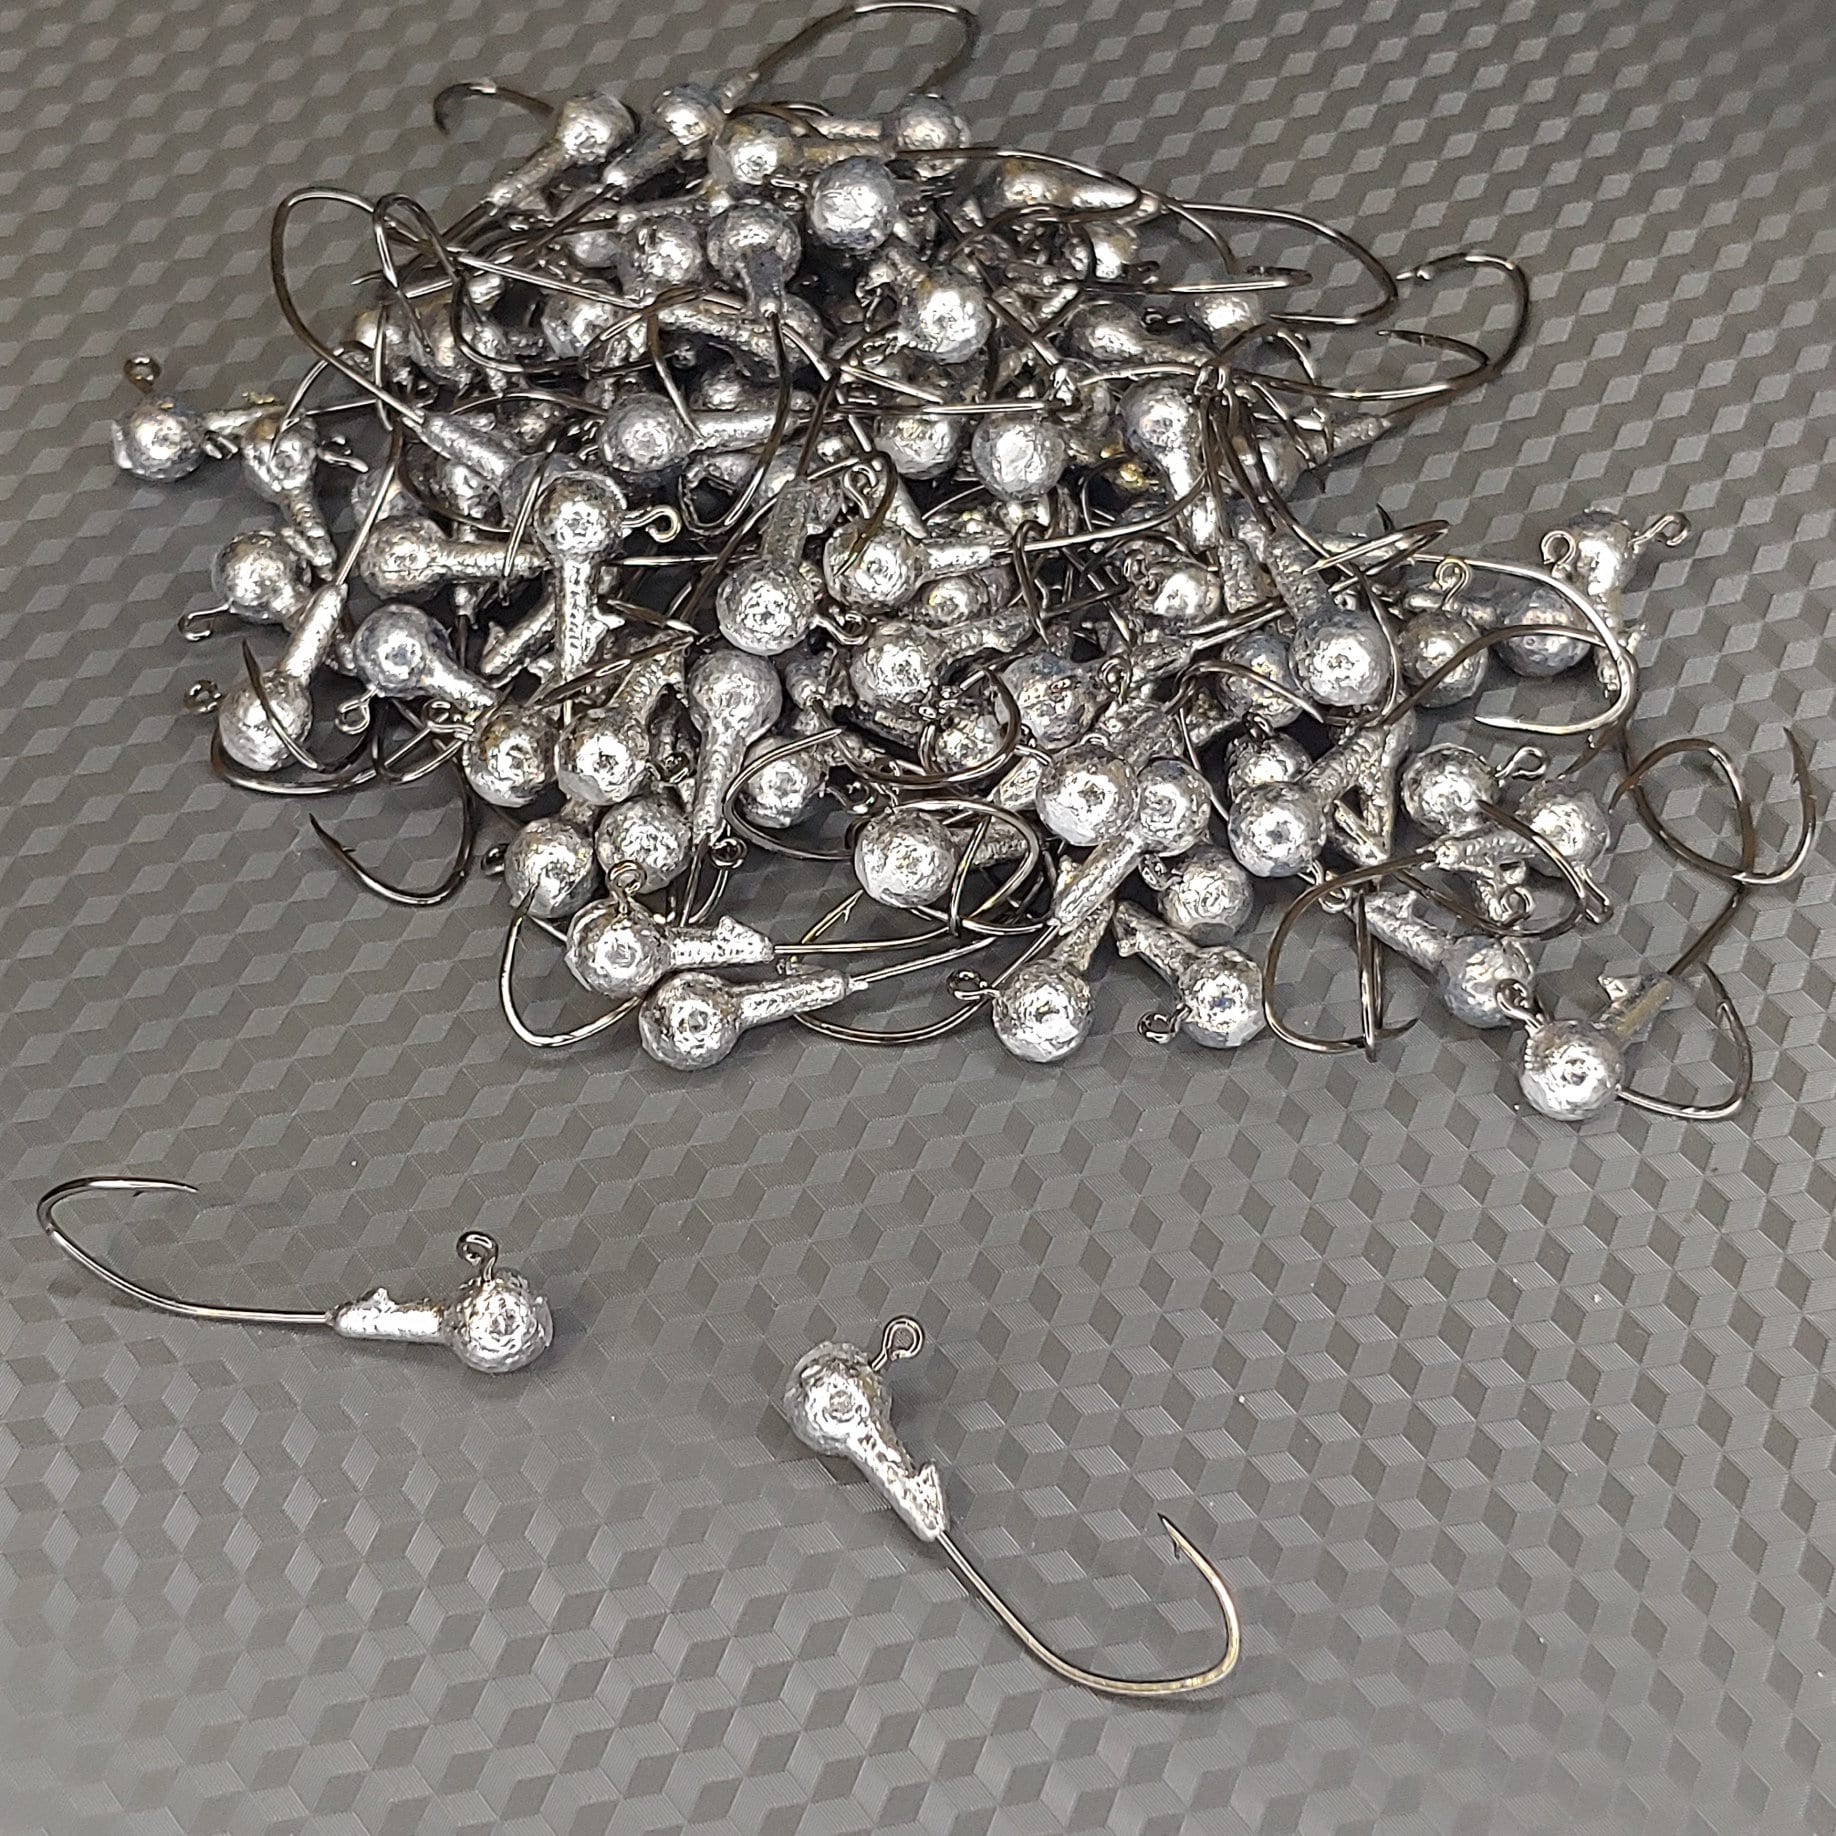 50 Pk 1/16 Oz Jig Heads With Collar 4 Lil' Nasty Sickle Hook 